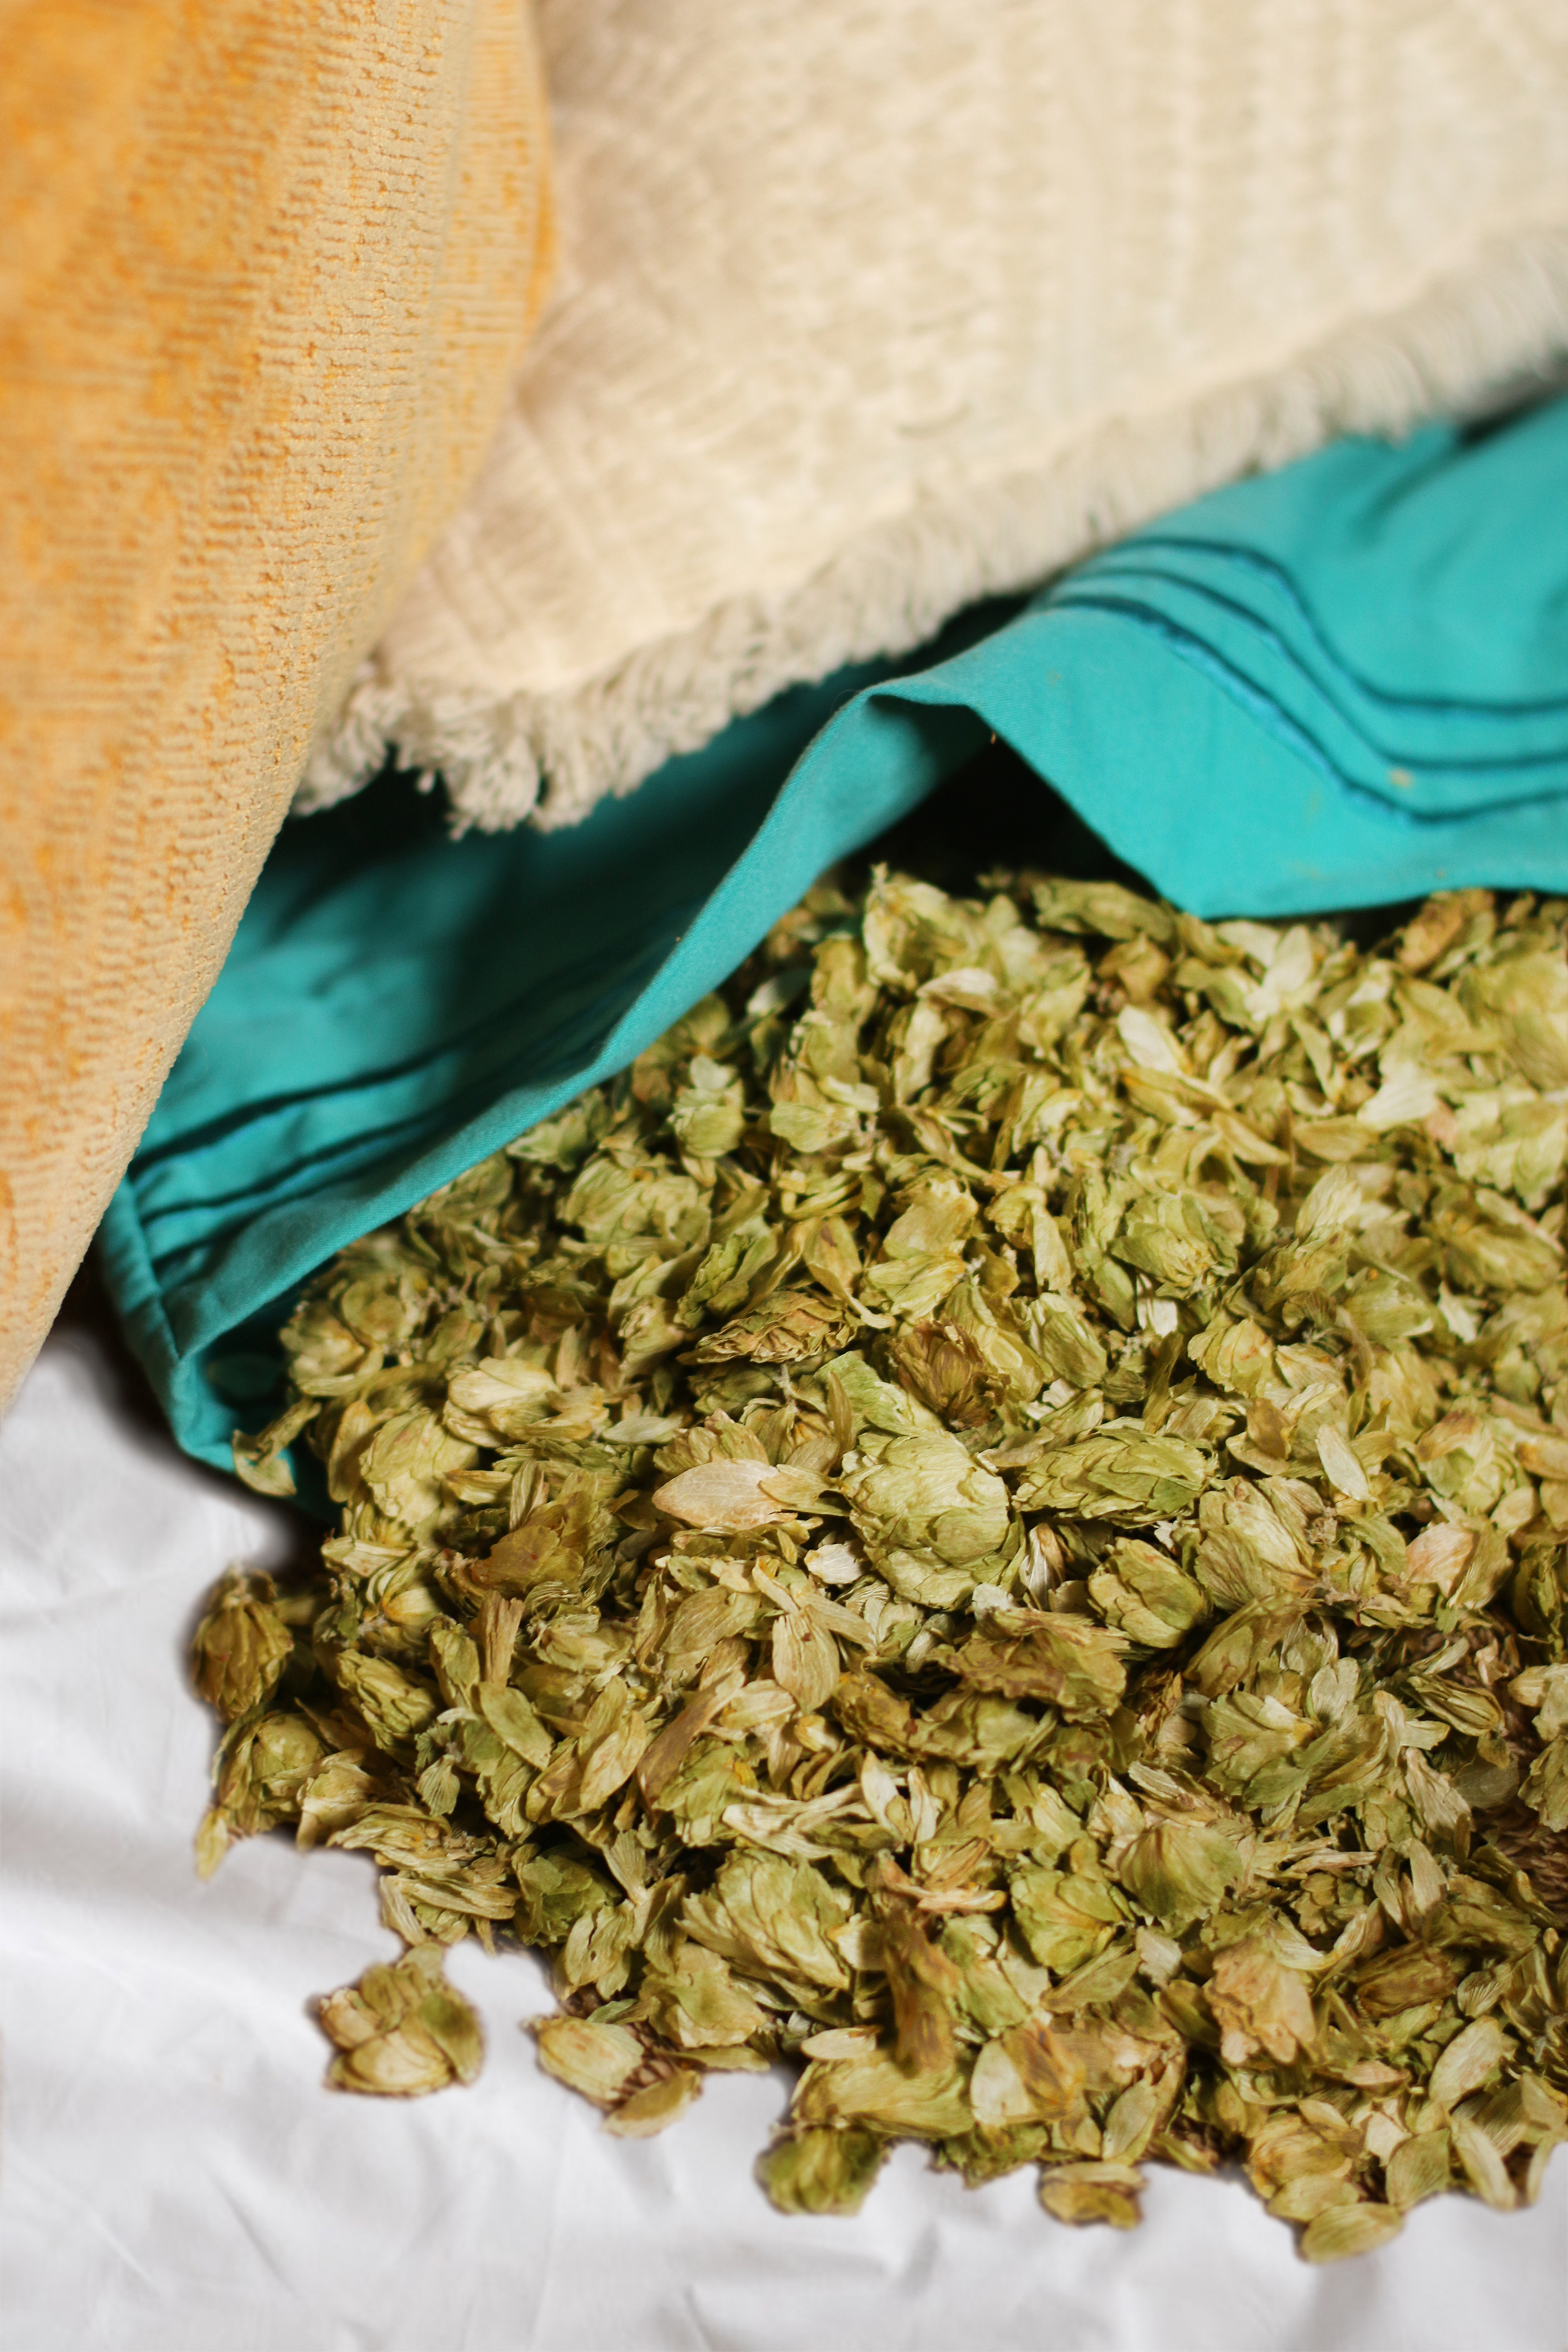 dried-hops-flowers-spilling-out-of-pillowcase-on-bed